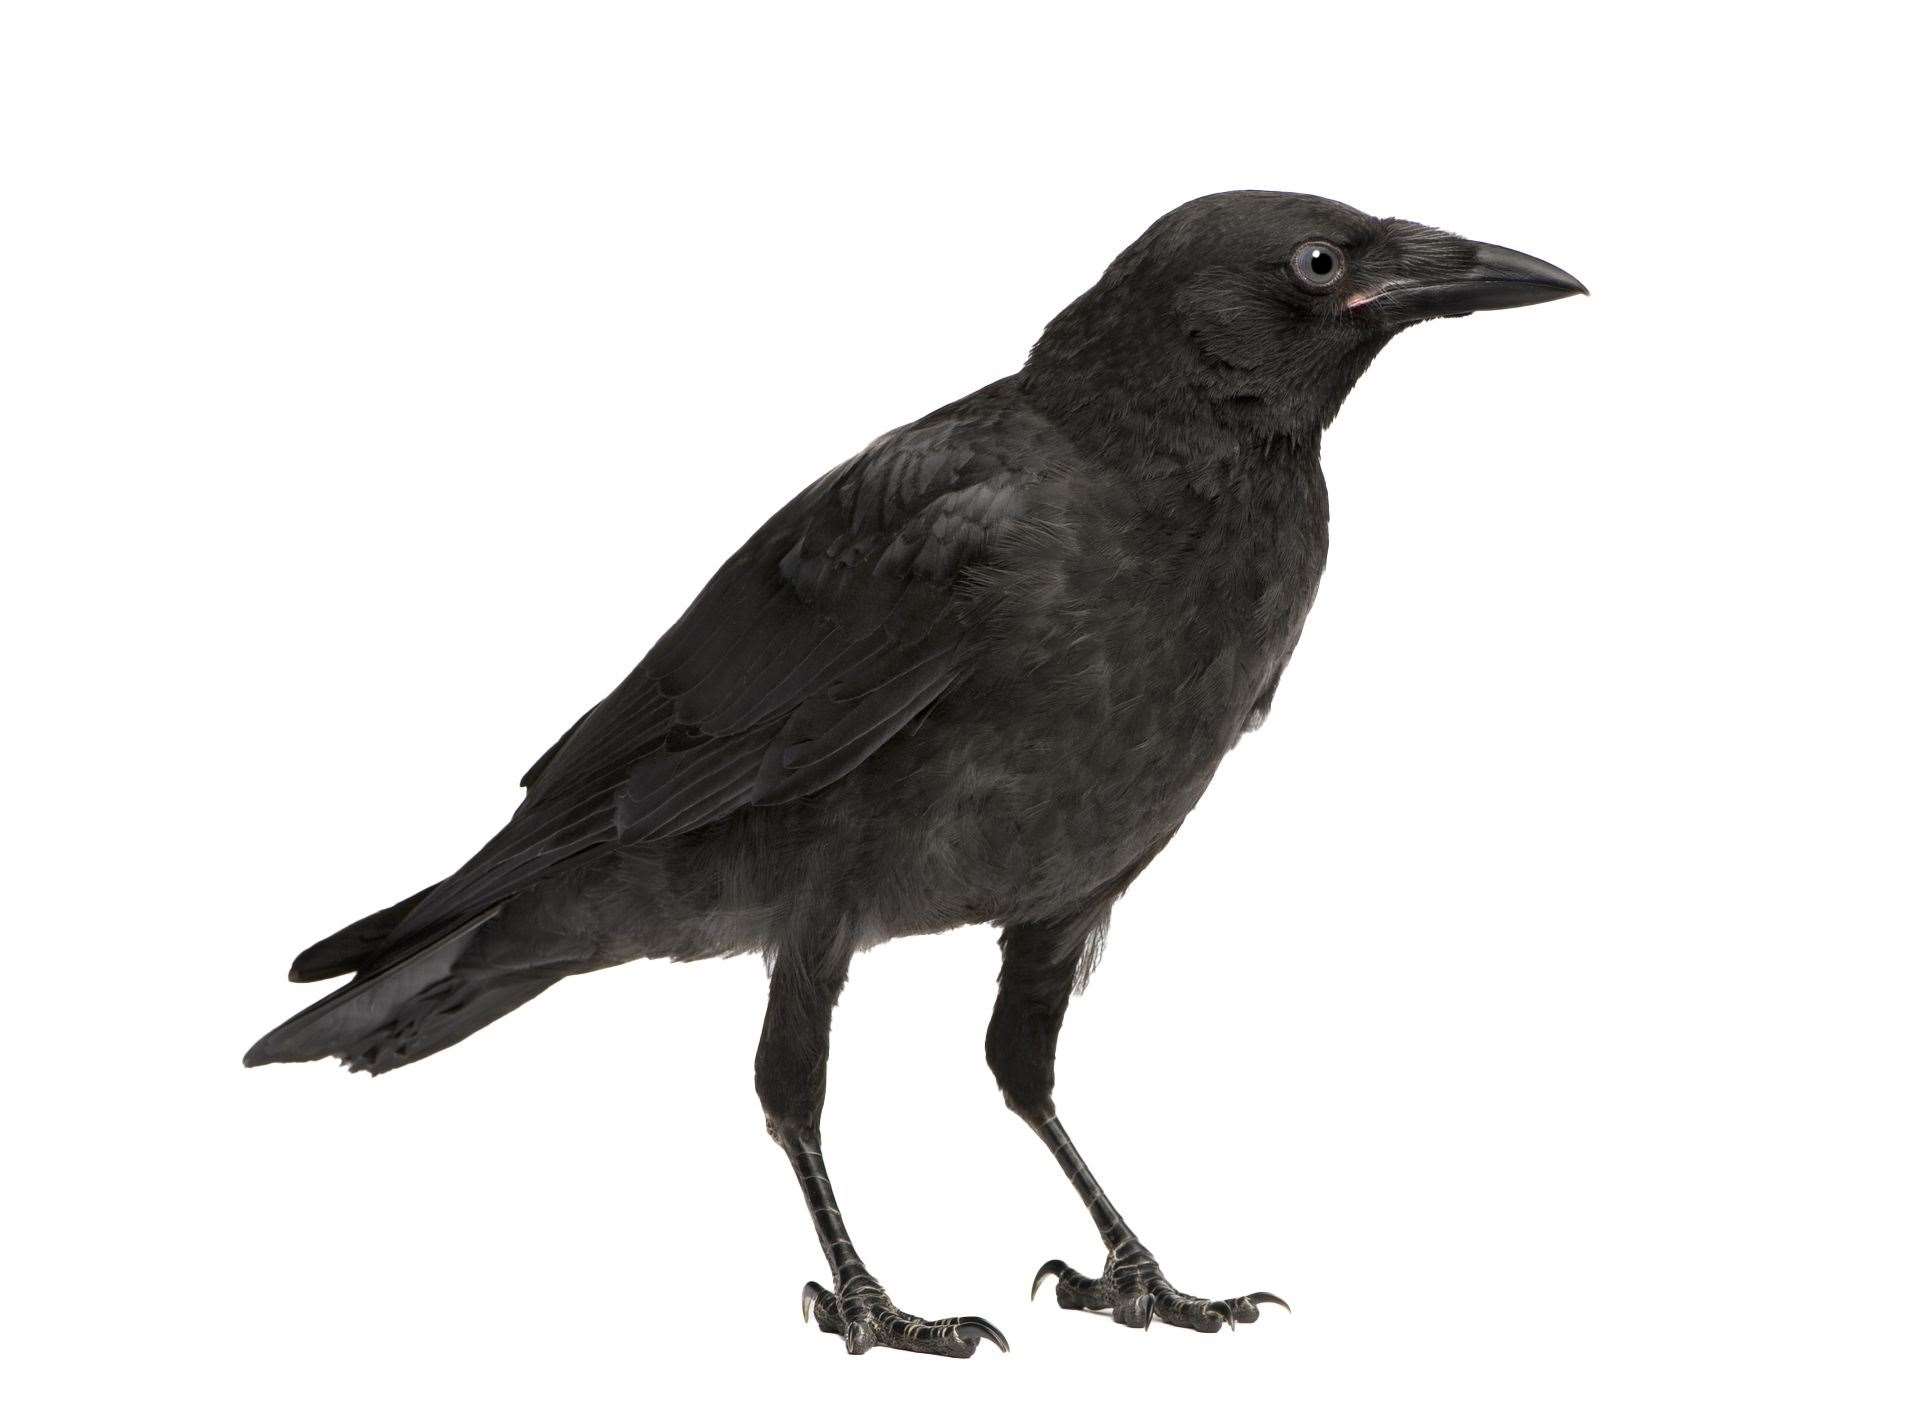 A crow is for life, not just for Halloween, or lunch. Stock image: carrion crow